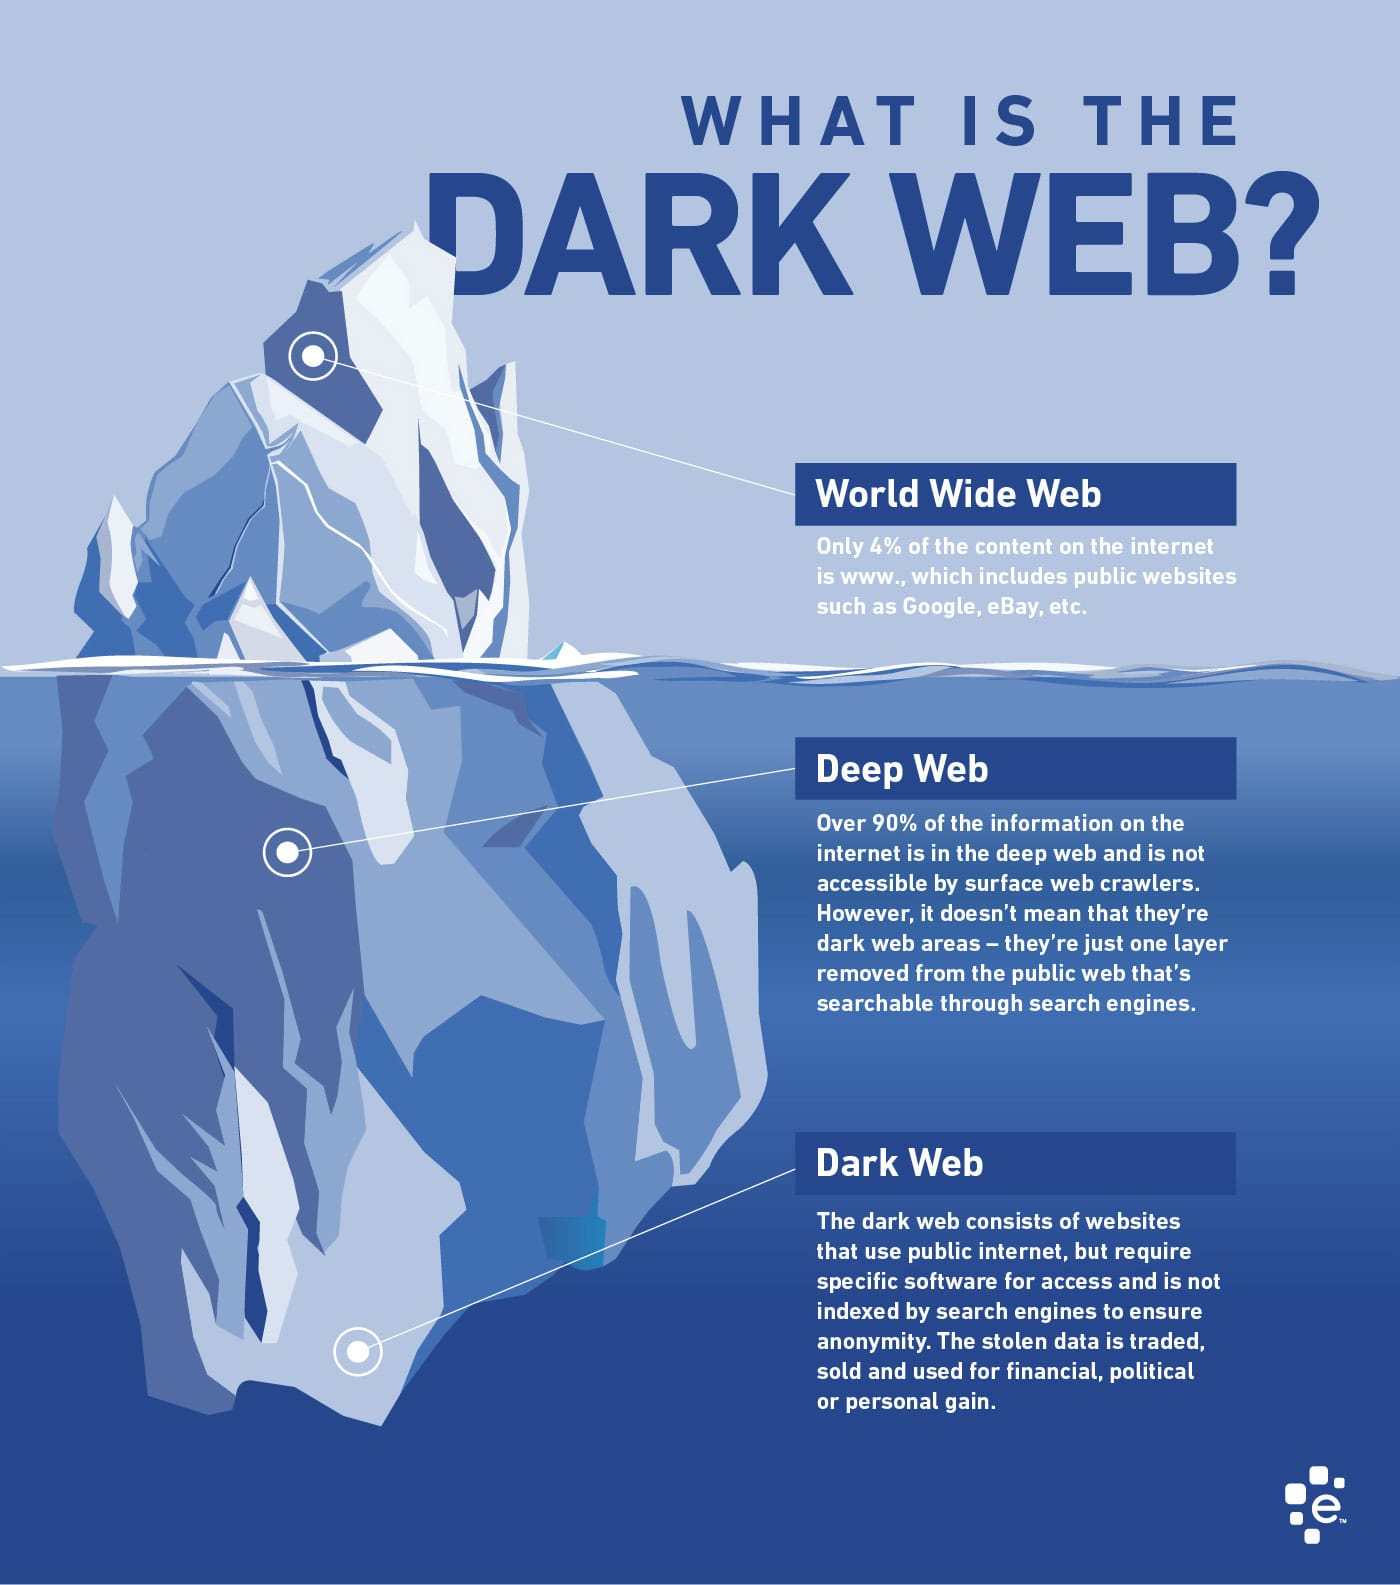 How To Pay With Bitcoin On Dark Web